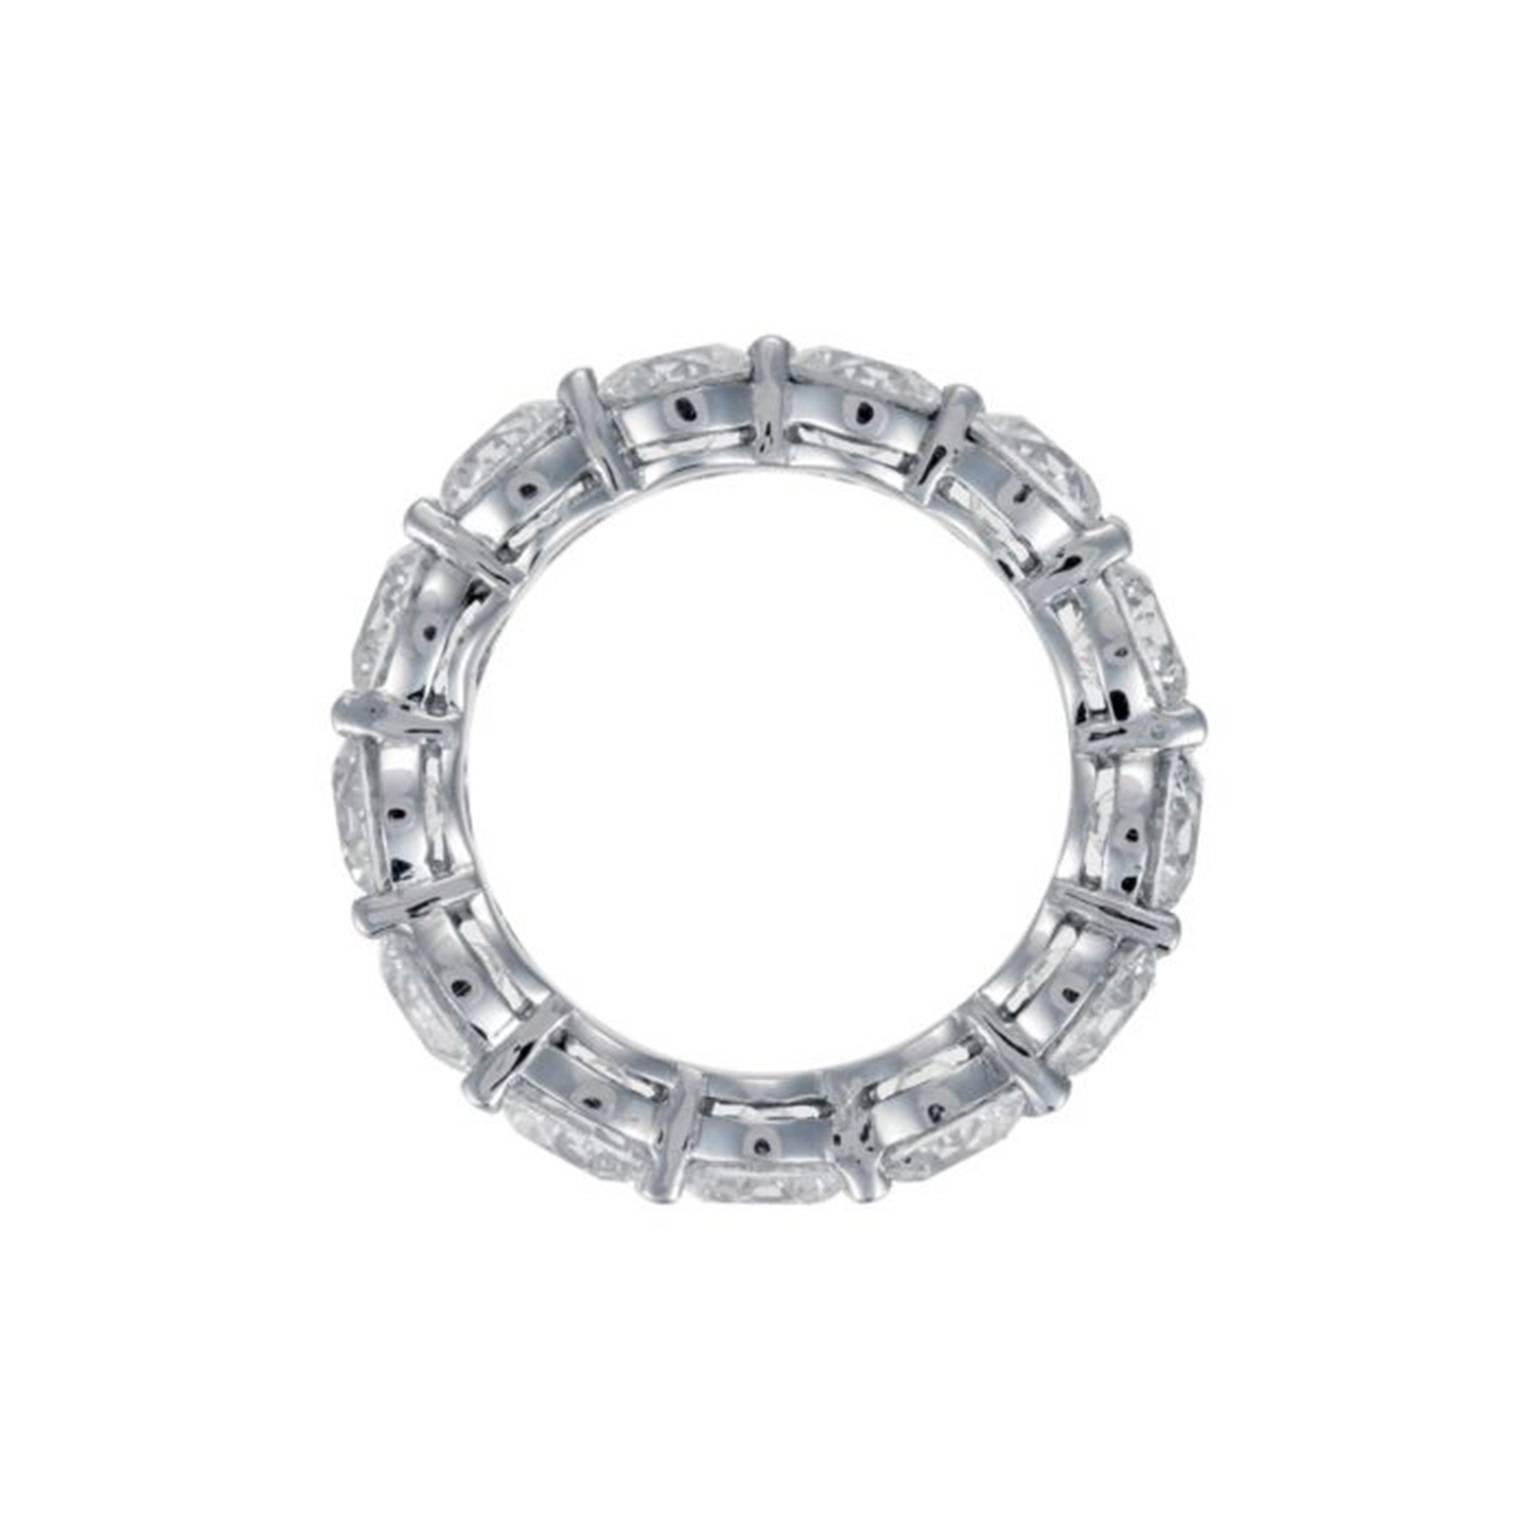 Beautiful Platinum All-The-Way Eternity Wedding Band features 9.30 Carat of 13 Round Cut Diamonds. The ring is available in 6 size, but could be resized upon your request.